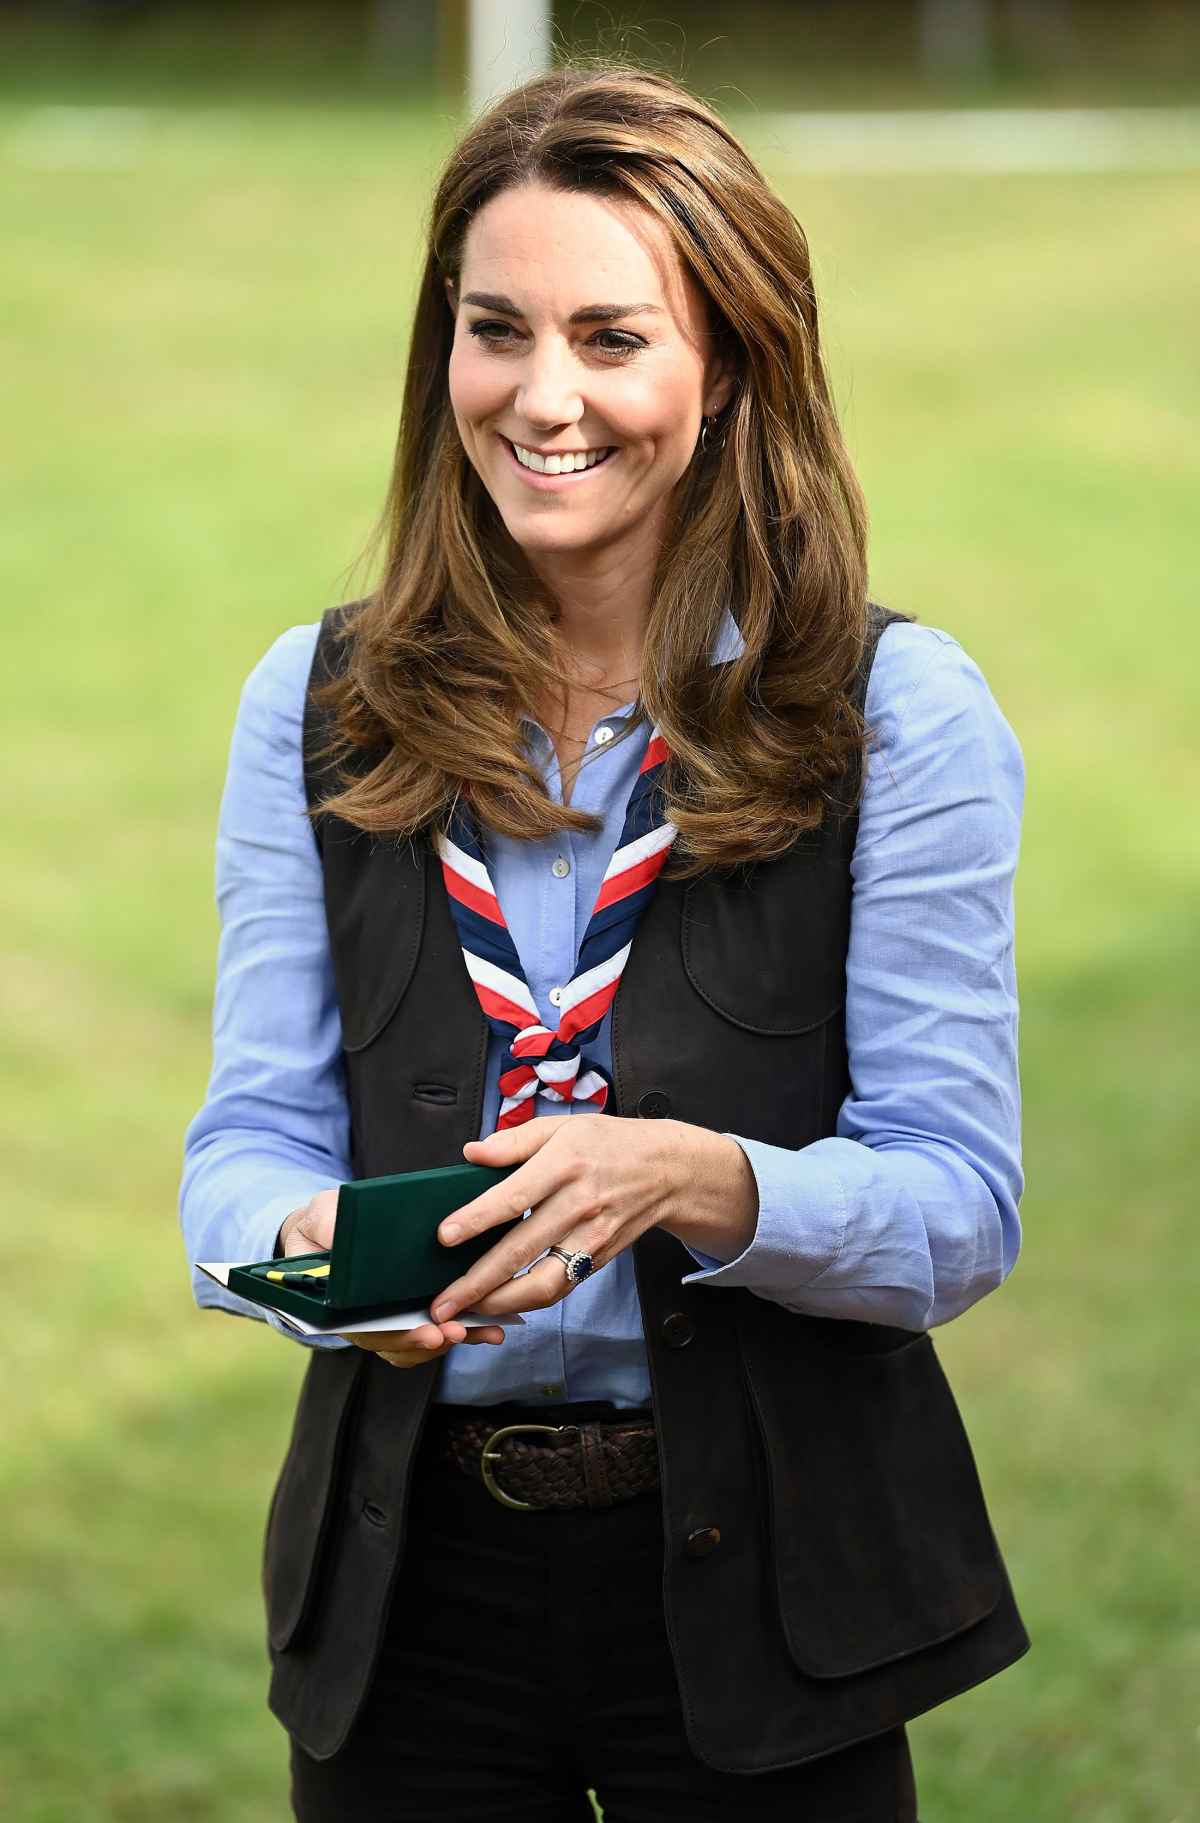 Kate Middleton Wears Chic Camp Outfit While Visiting a Scout Group